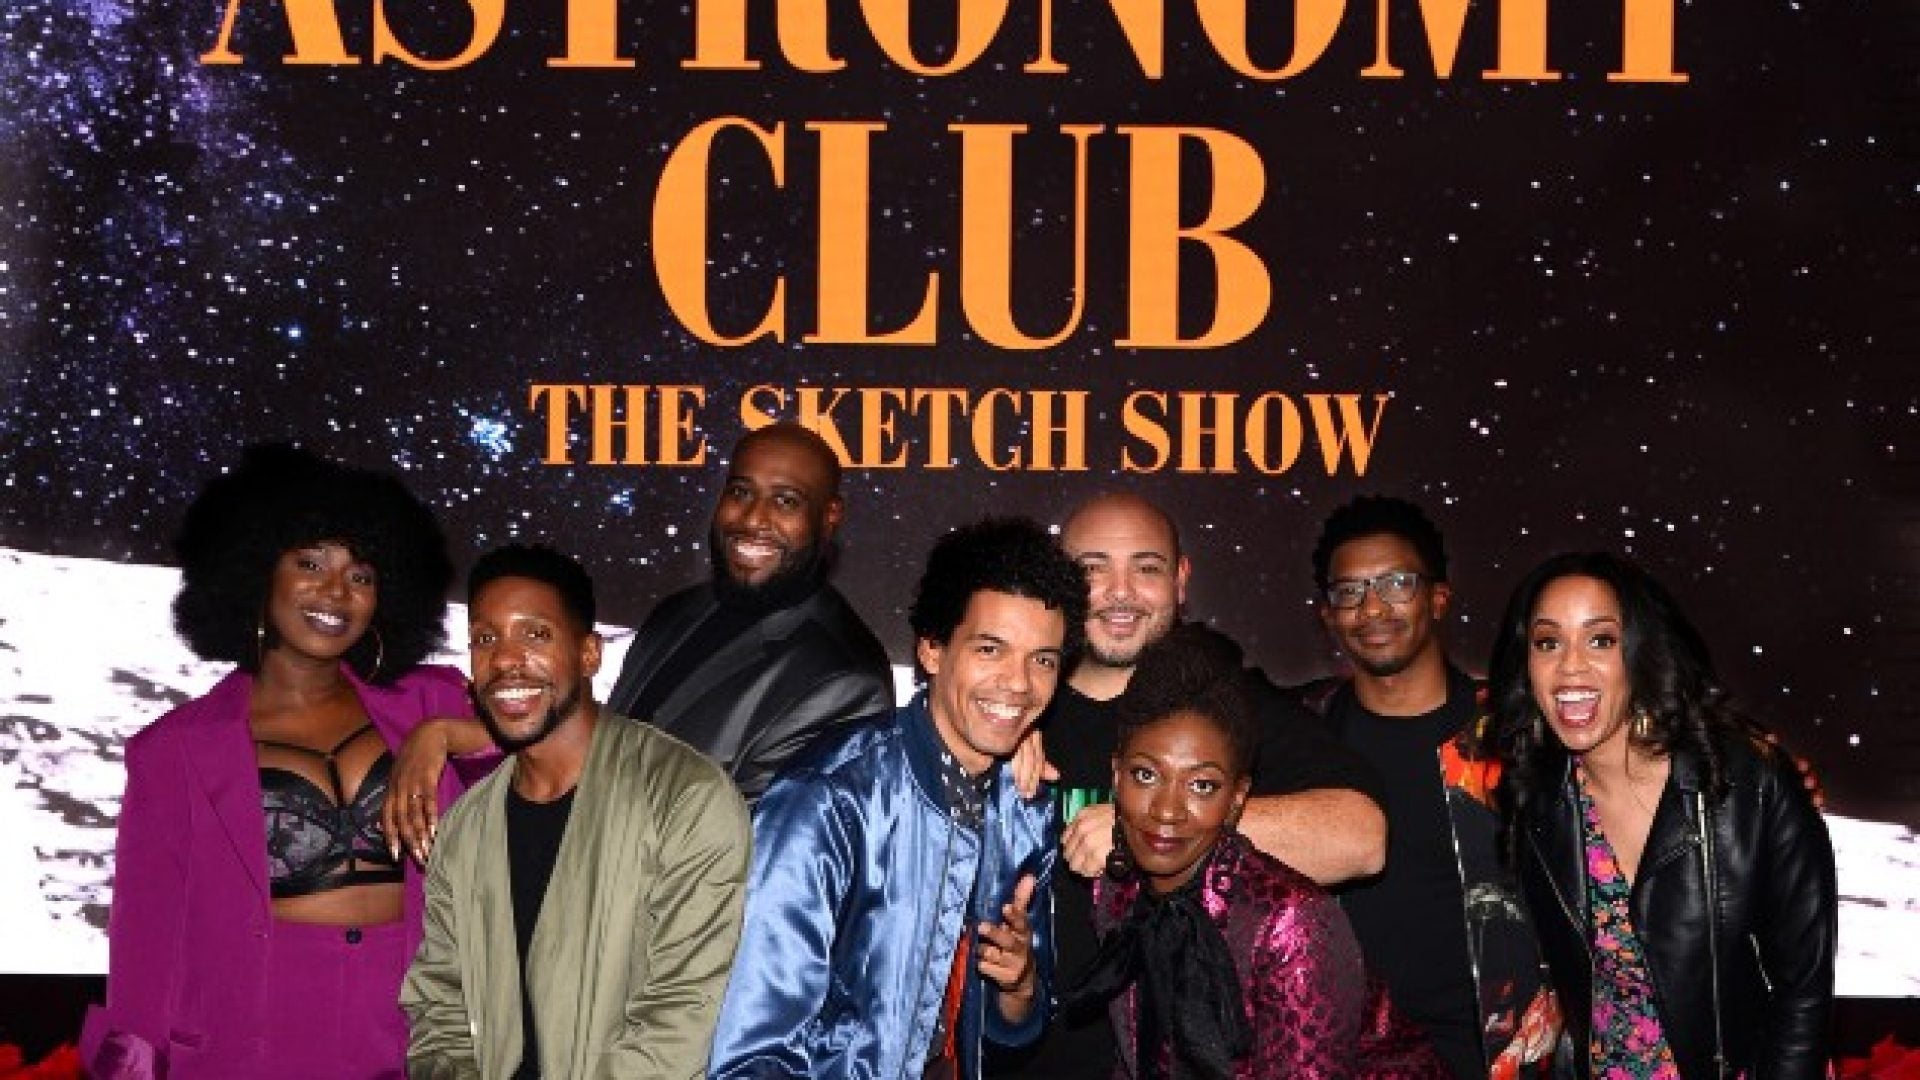 This Sketch From 'Astronomy Club' Is Like A Funny PSA For Protecting Your Edges